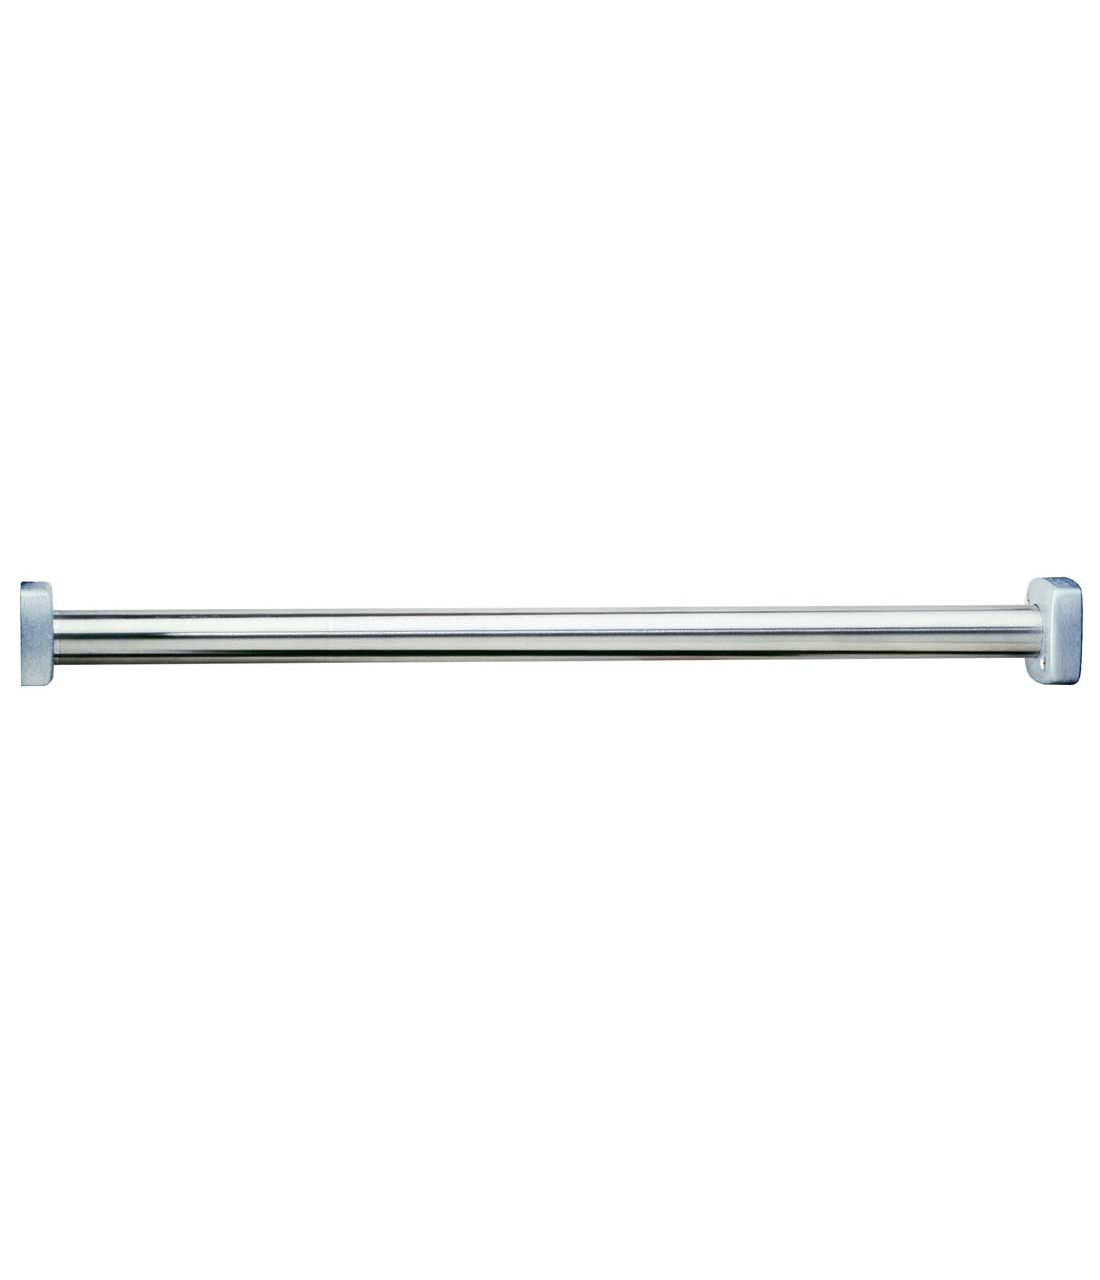 1-1/4 Diameter x 60 Length Satin Finish Bobrick 6047x60 ClassicSeries 304 Stainless Steel Extra Heavy Duty Shower Curtain Rod with Square End Flange